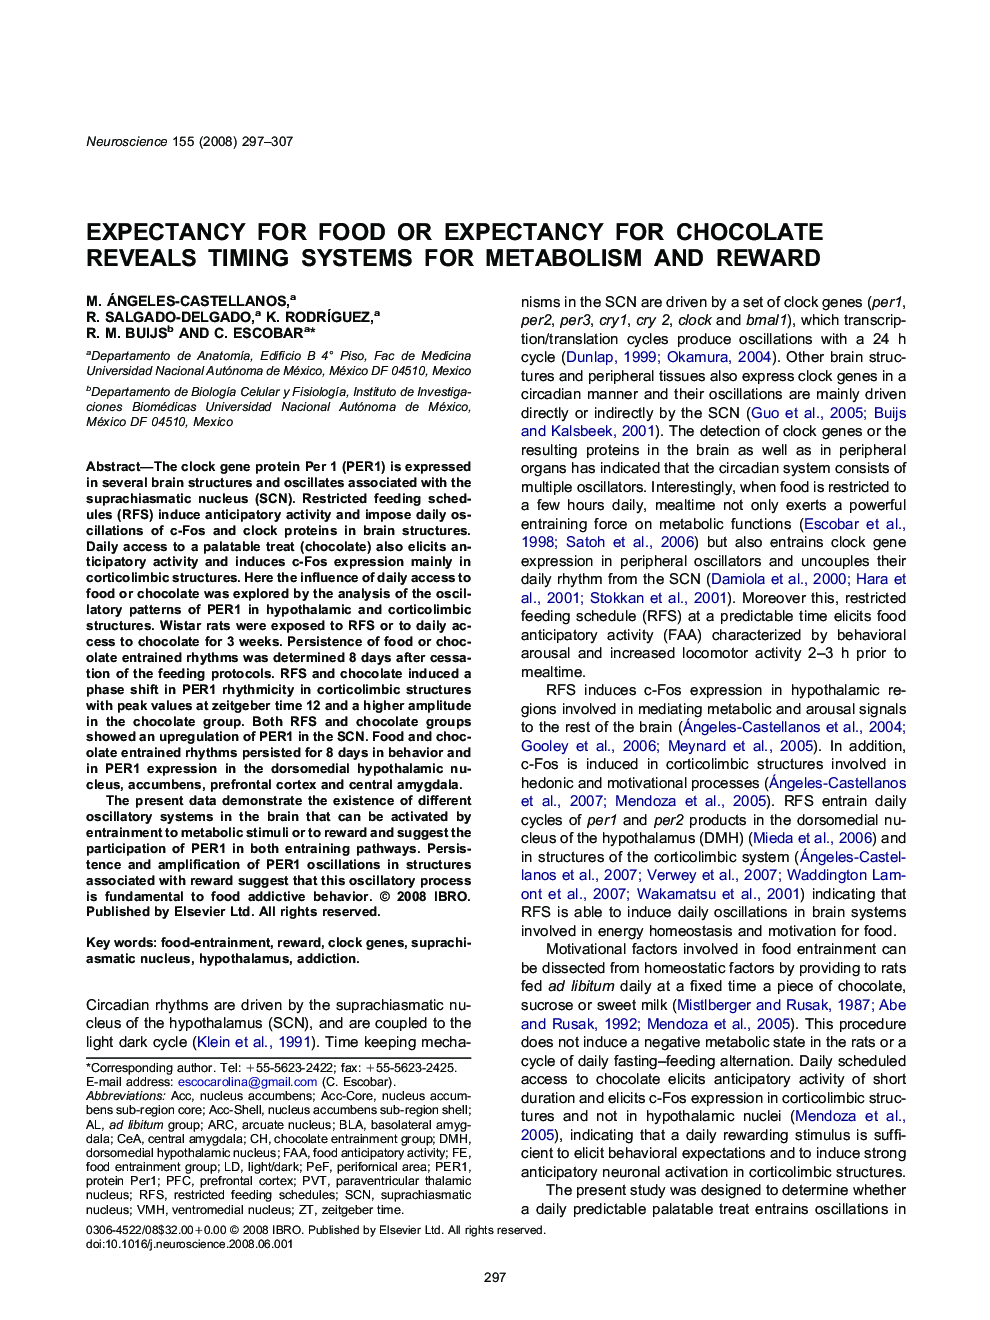 Expectancy for food or expectancy for chocolate reveals timing systems for metabolism and reward